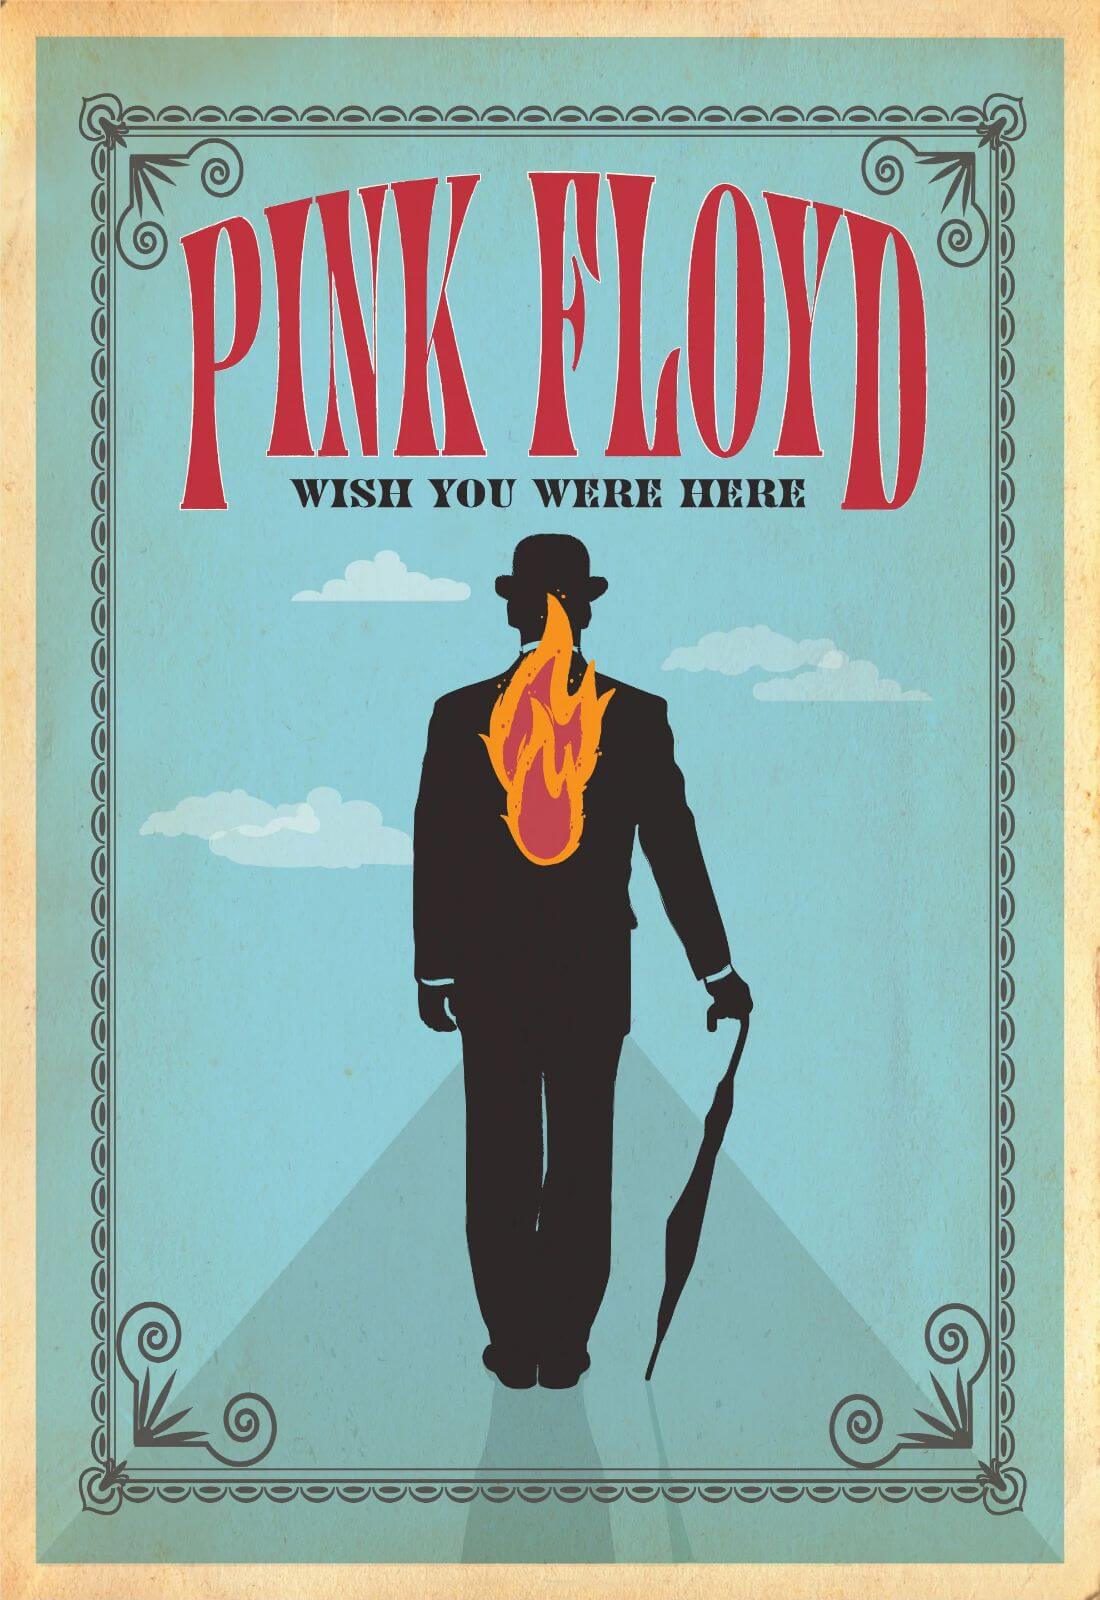 Pink Floyd - Wish You Were Here - Fan Art Music Poster - Large Art Prints  by Tallenge, Buy Posters, Frames, Canvas & Digital Art Prints